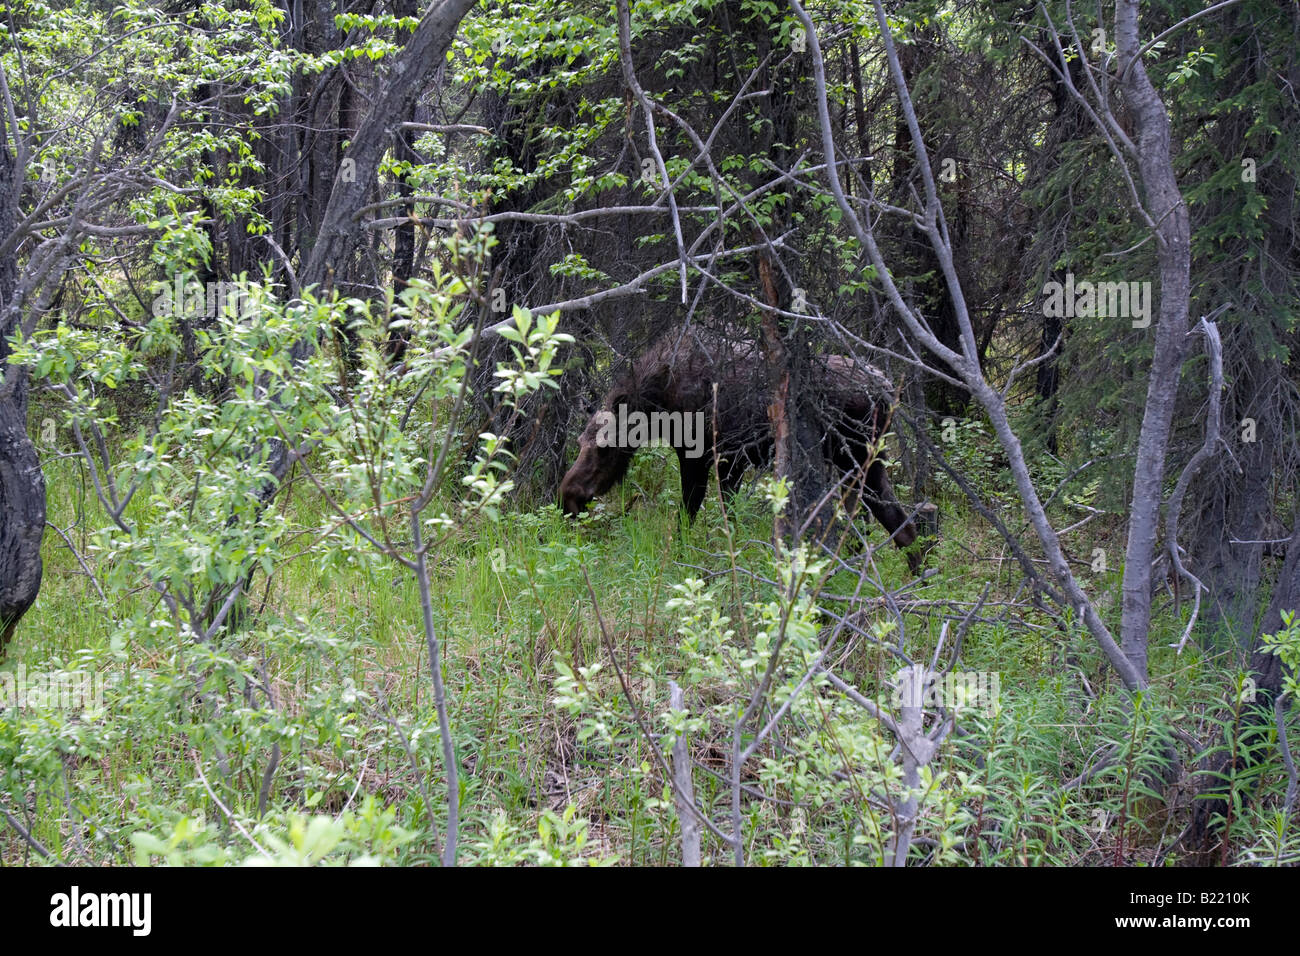 Moose in the forest, Alaska. Stock Photo